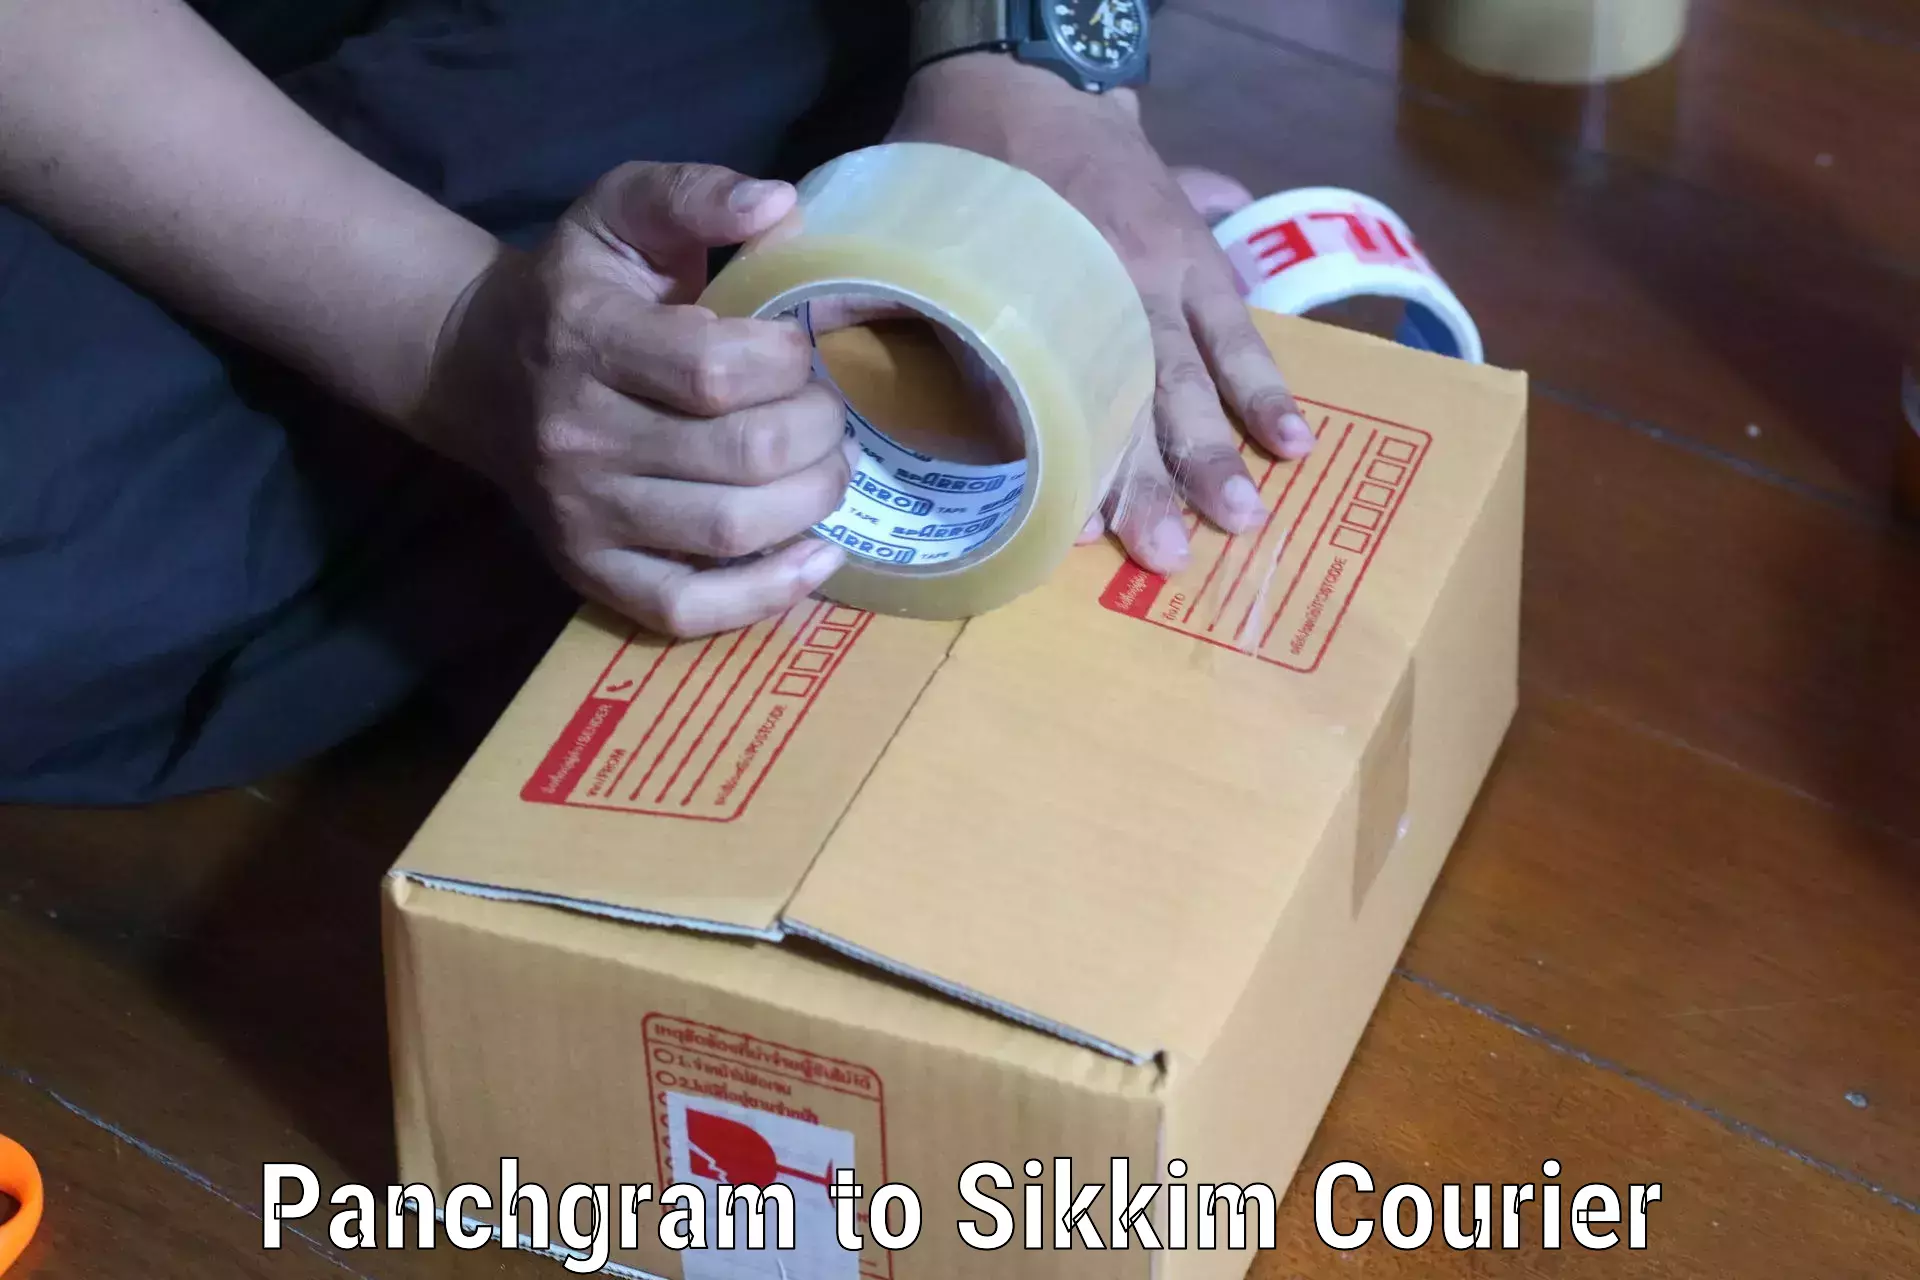 Global shipping networks Panchgram to East Sikkim